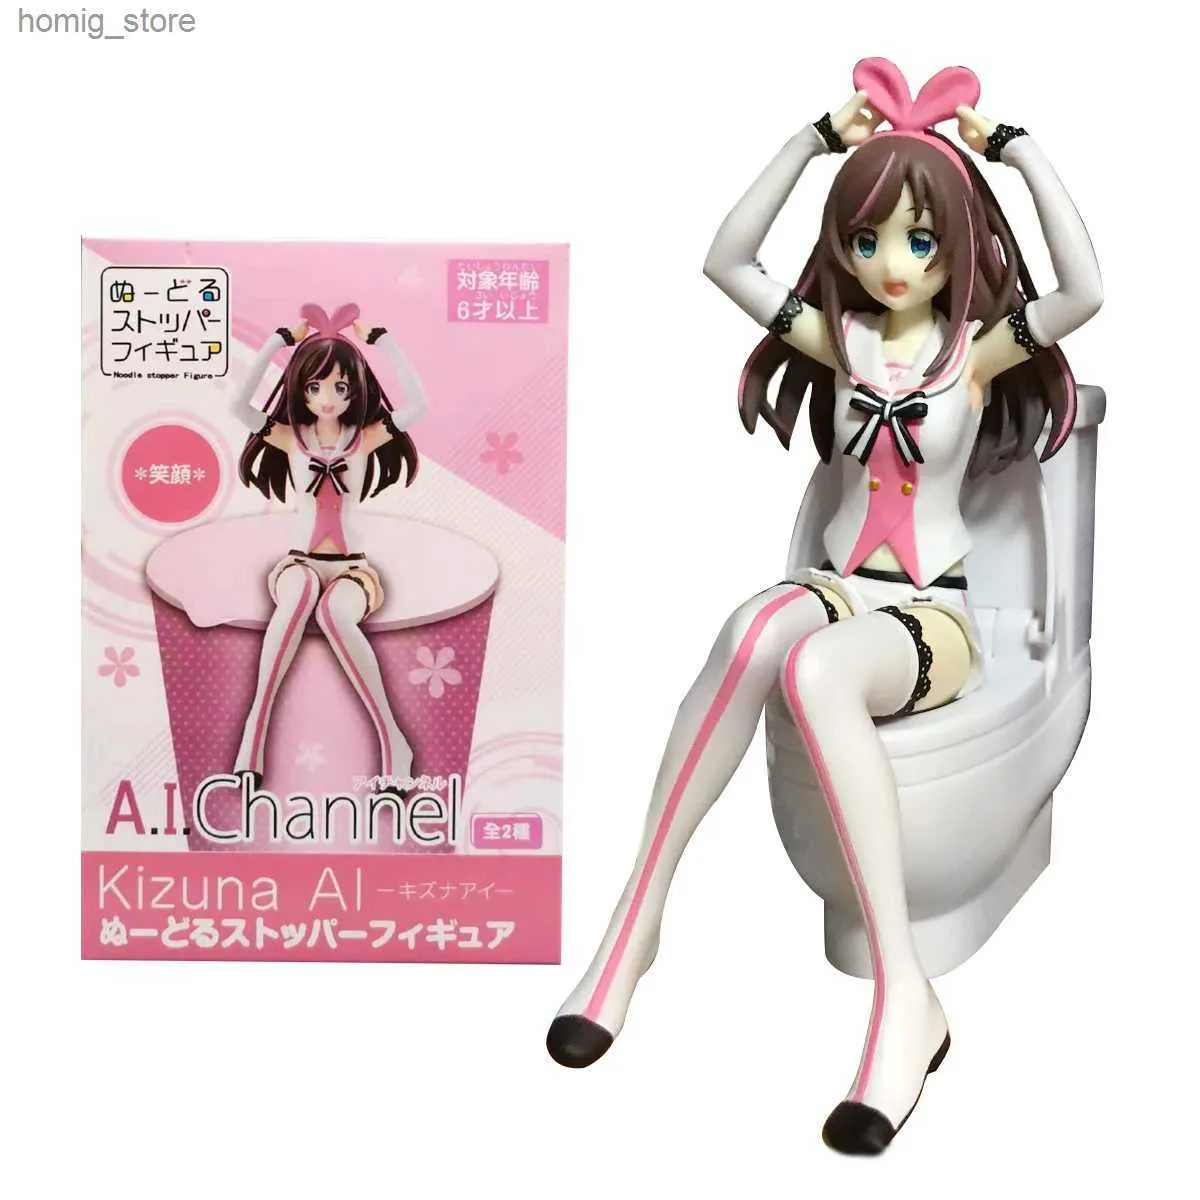 Action Toy Figures New Anime Kizuna AI Figure Instant Noodle Pressure Virtual Singer Princess Costume JK Sitting Girl Doll Ornament Gift Toy Model Y240415